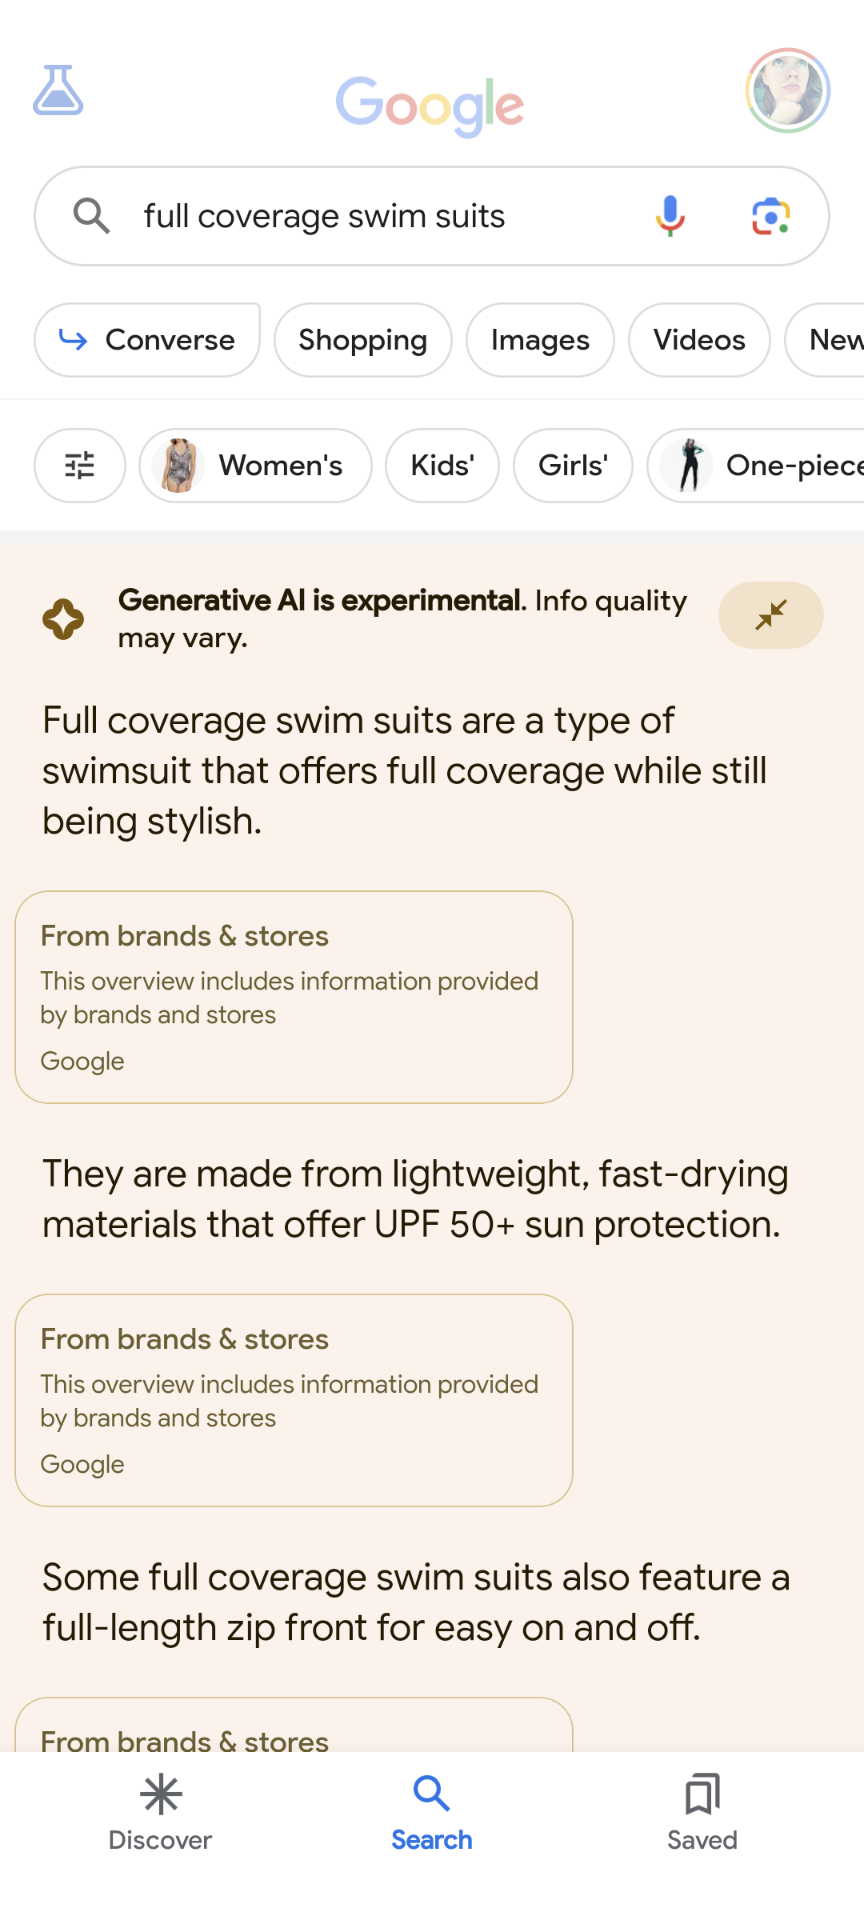 a mobile search for ‘full coverage swim suits’ generates several sentences in the AI response all followed by a box indicating ‘this overview includes information provided by brands and stores’